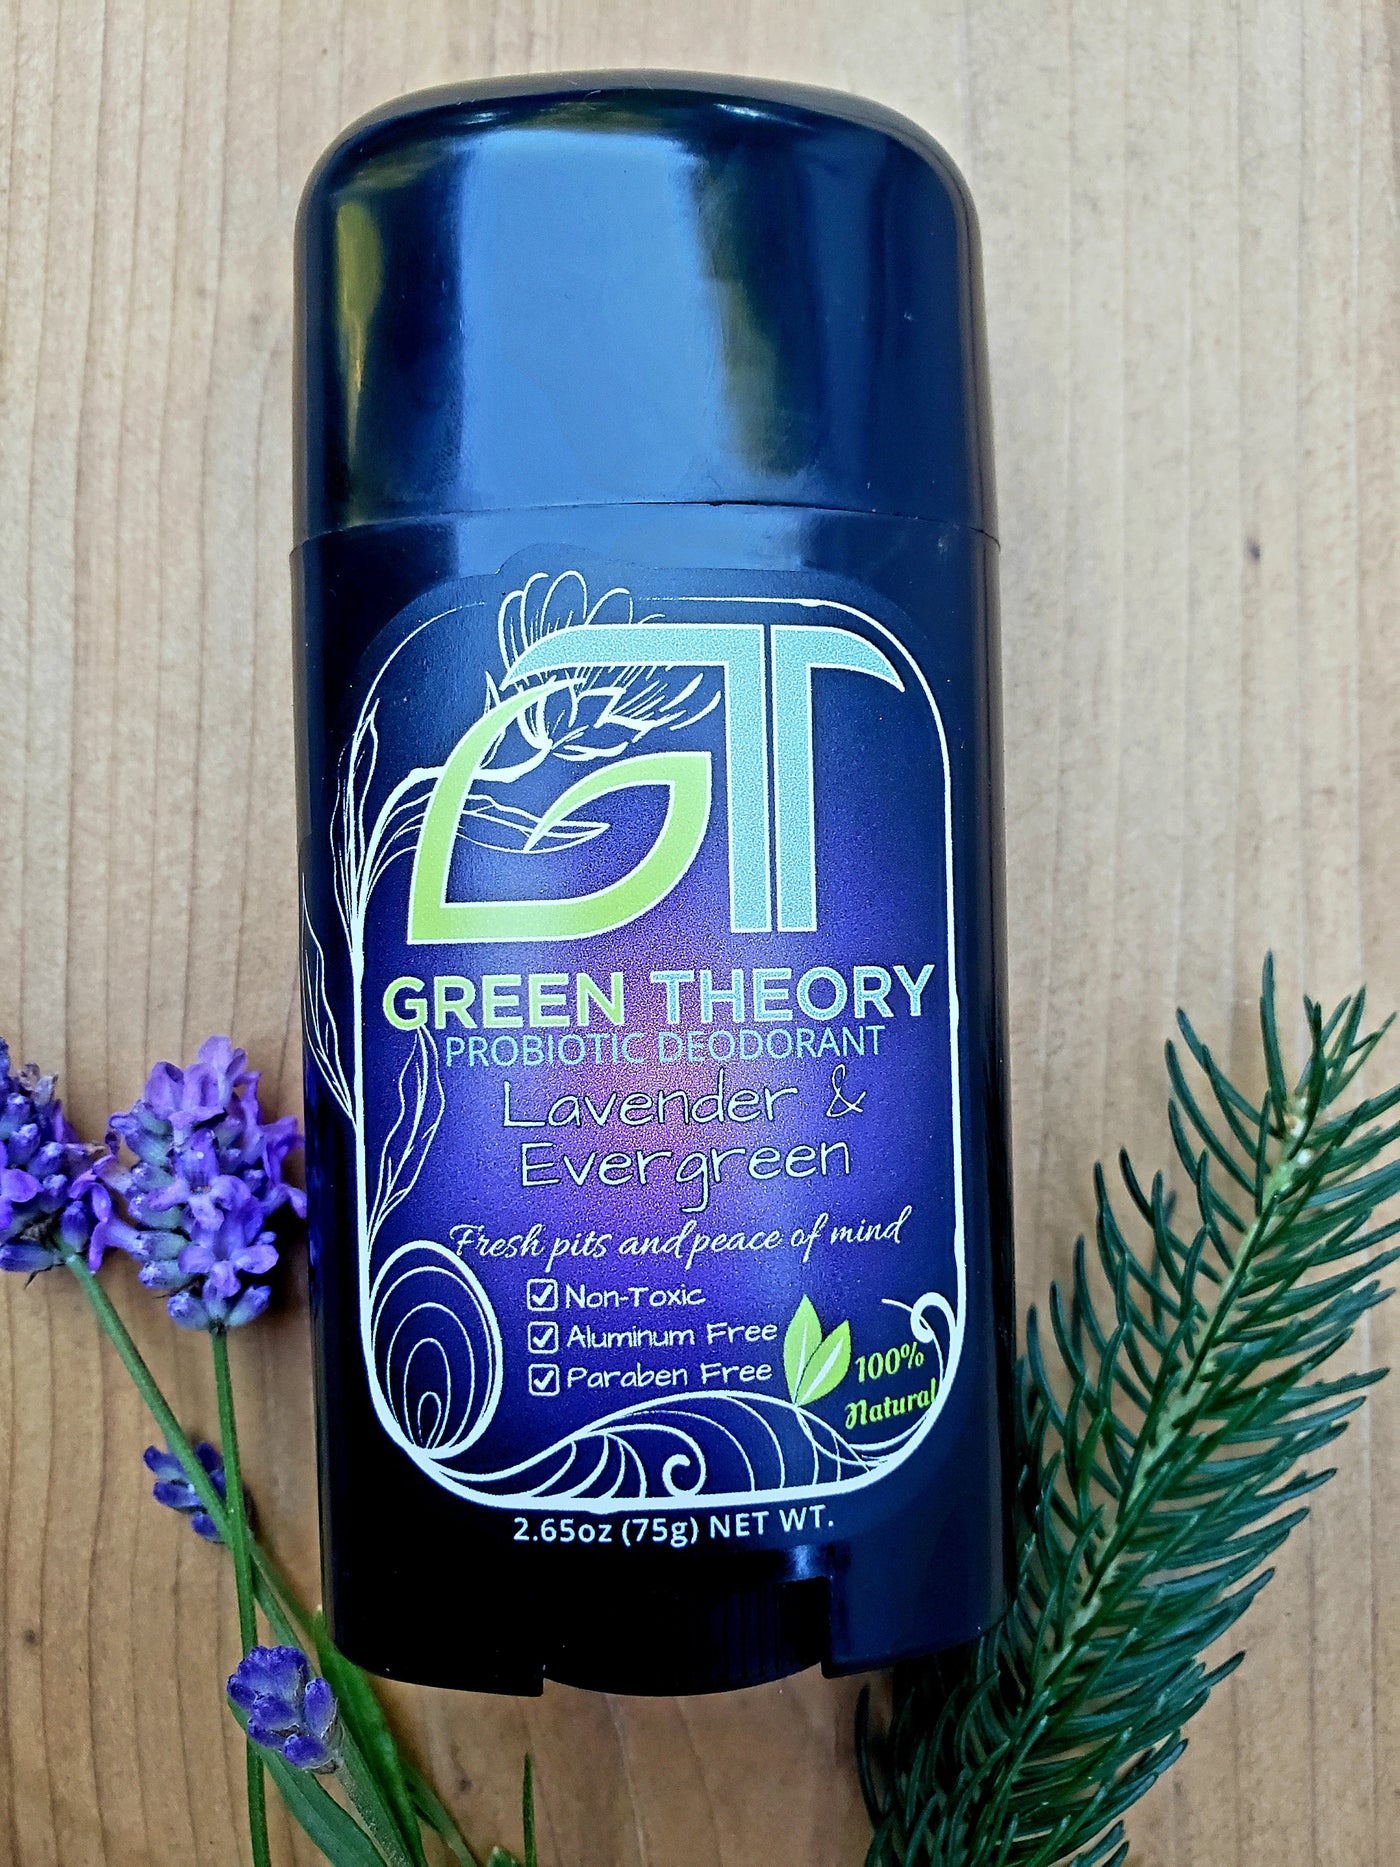 Photo of Green Theory Lavender & Evergreen womens deodorant. Deodorant is laying on wood texture with a sprig of lavender and evergreen cutting placed on the sides of the deodorant.